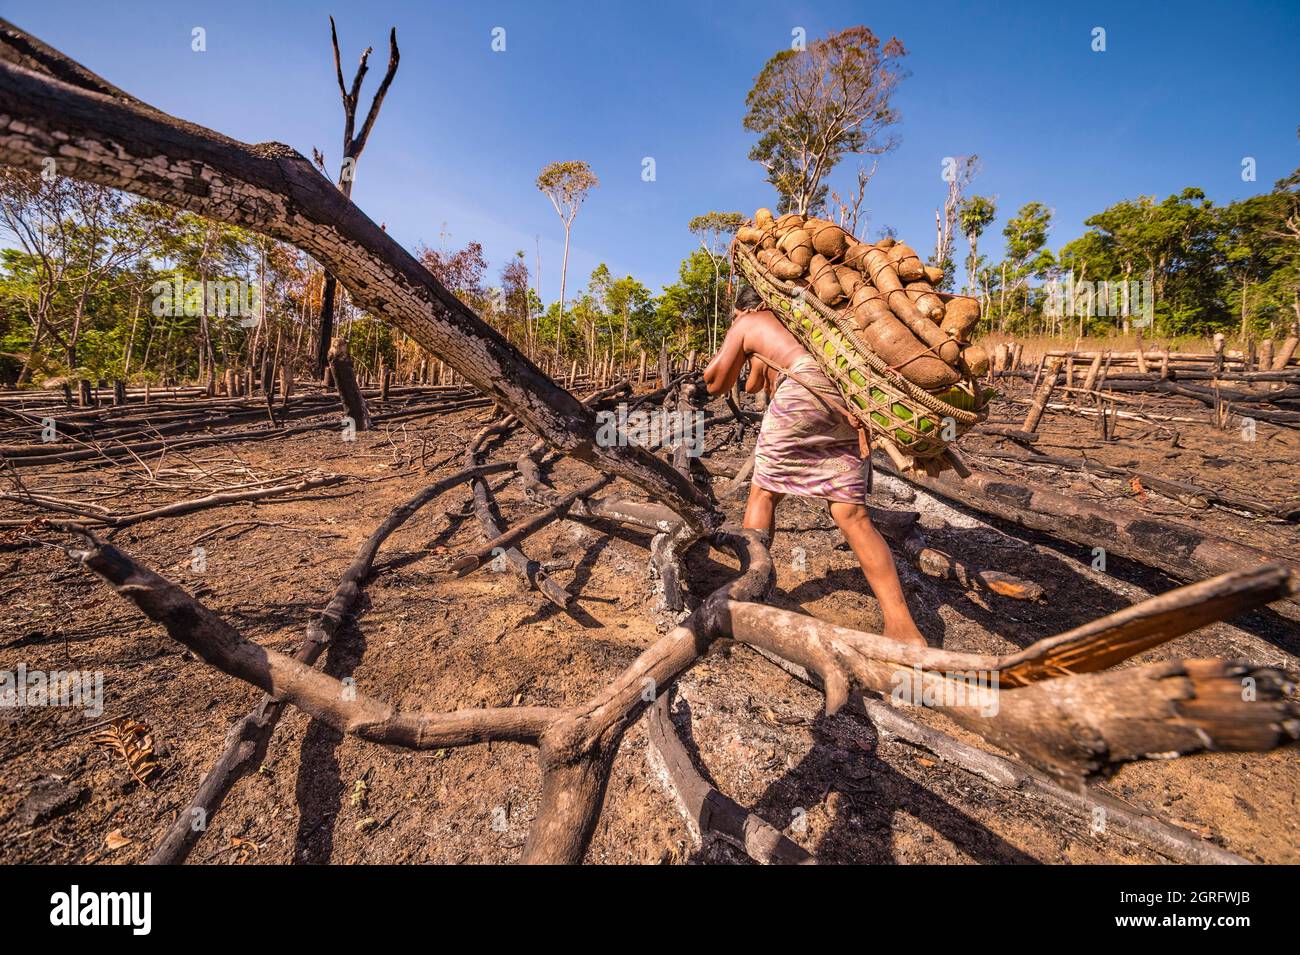 France, French Guiana, Parc Amazonien de Guyane, Camopi, cassava harvest in a abattis (artisanal cultivation area cleared in the middle of the tropical forest), Amerindian Wayãpi Stock Photo